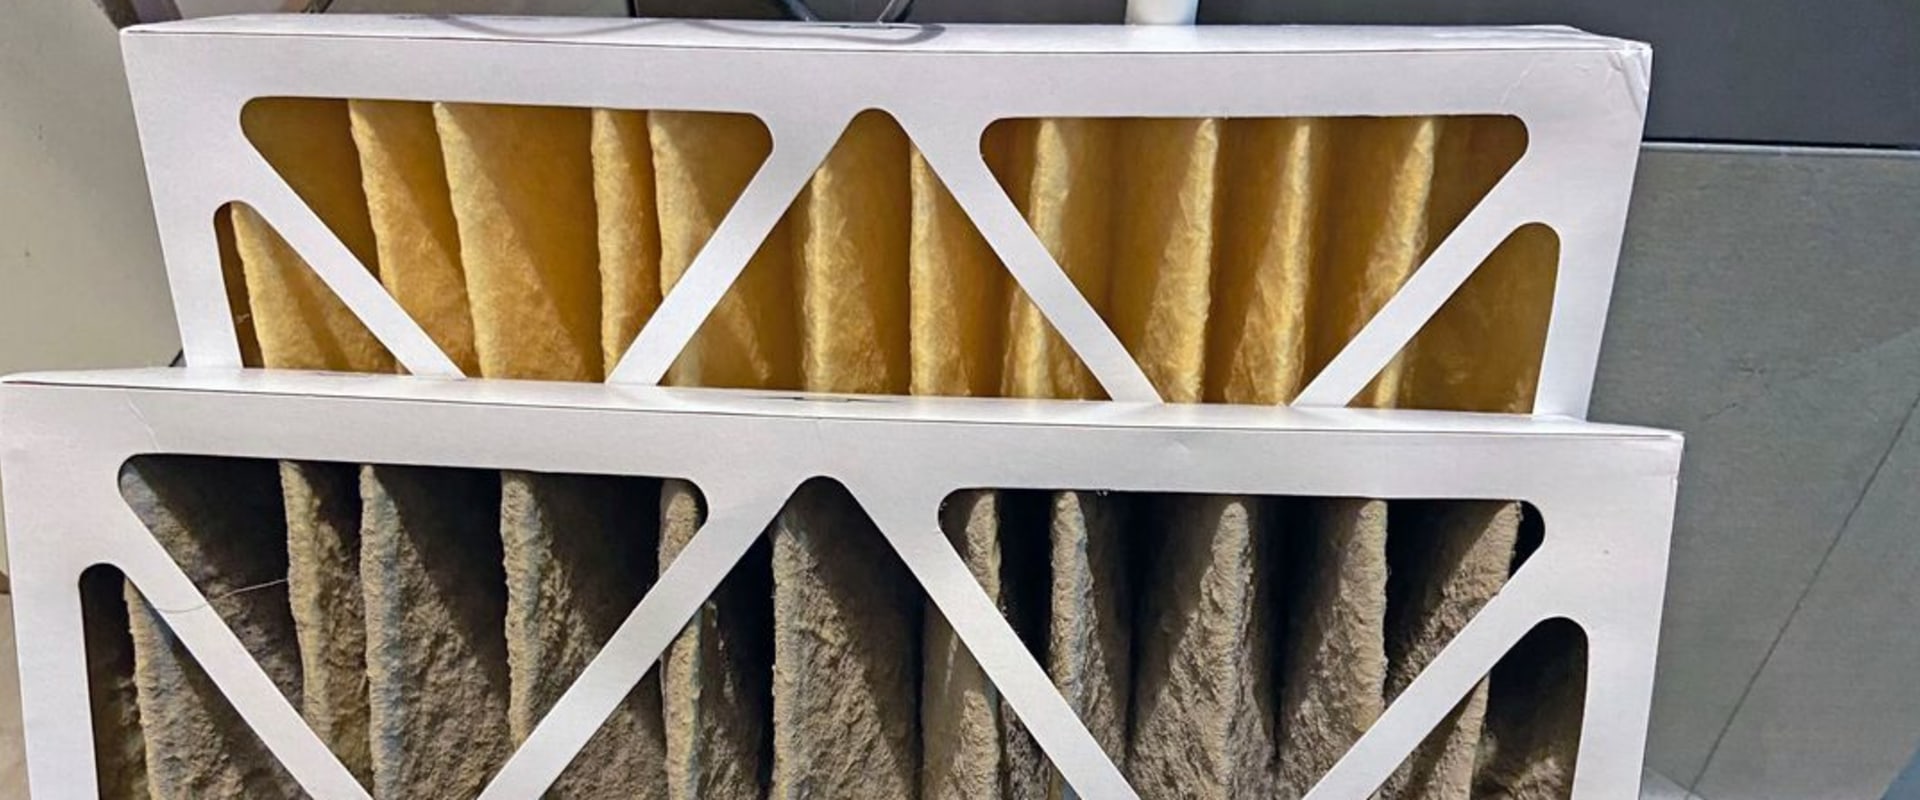 How to Tell When Your Home Air Filter Needs to be Replaced